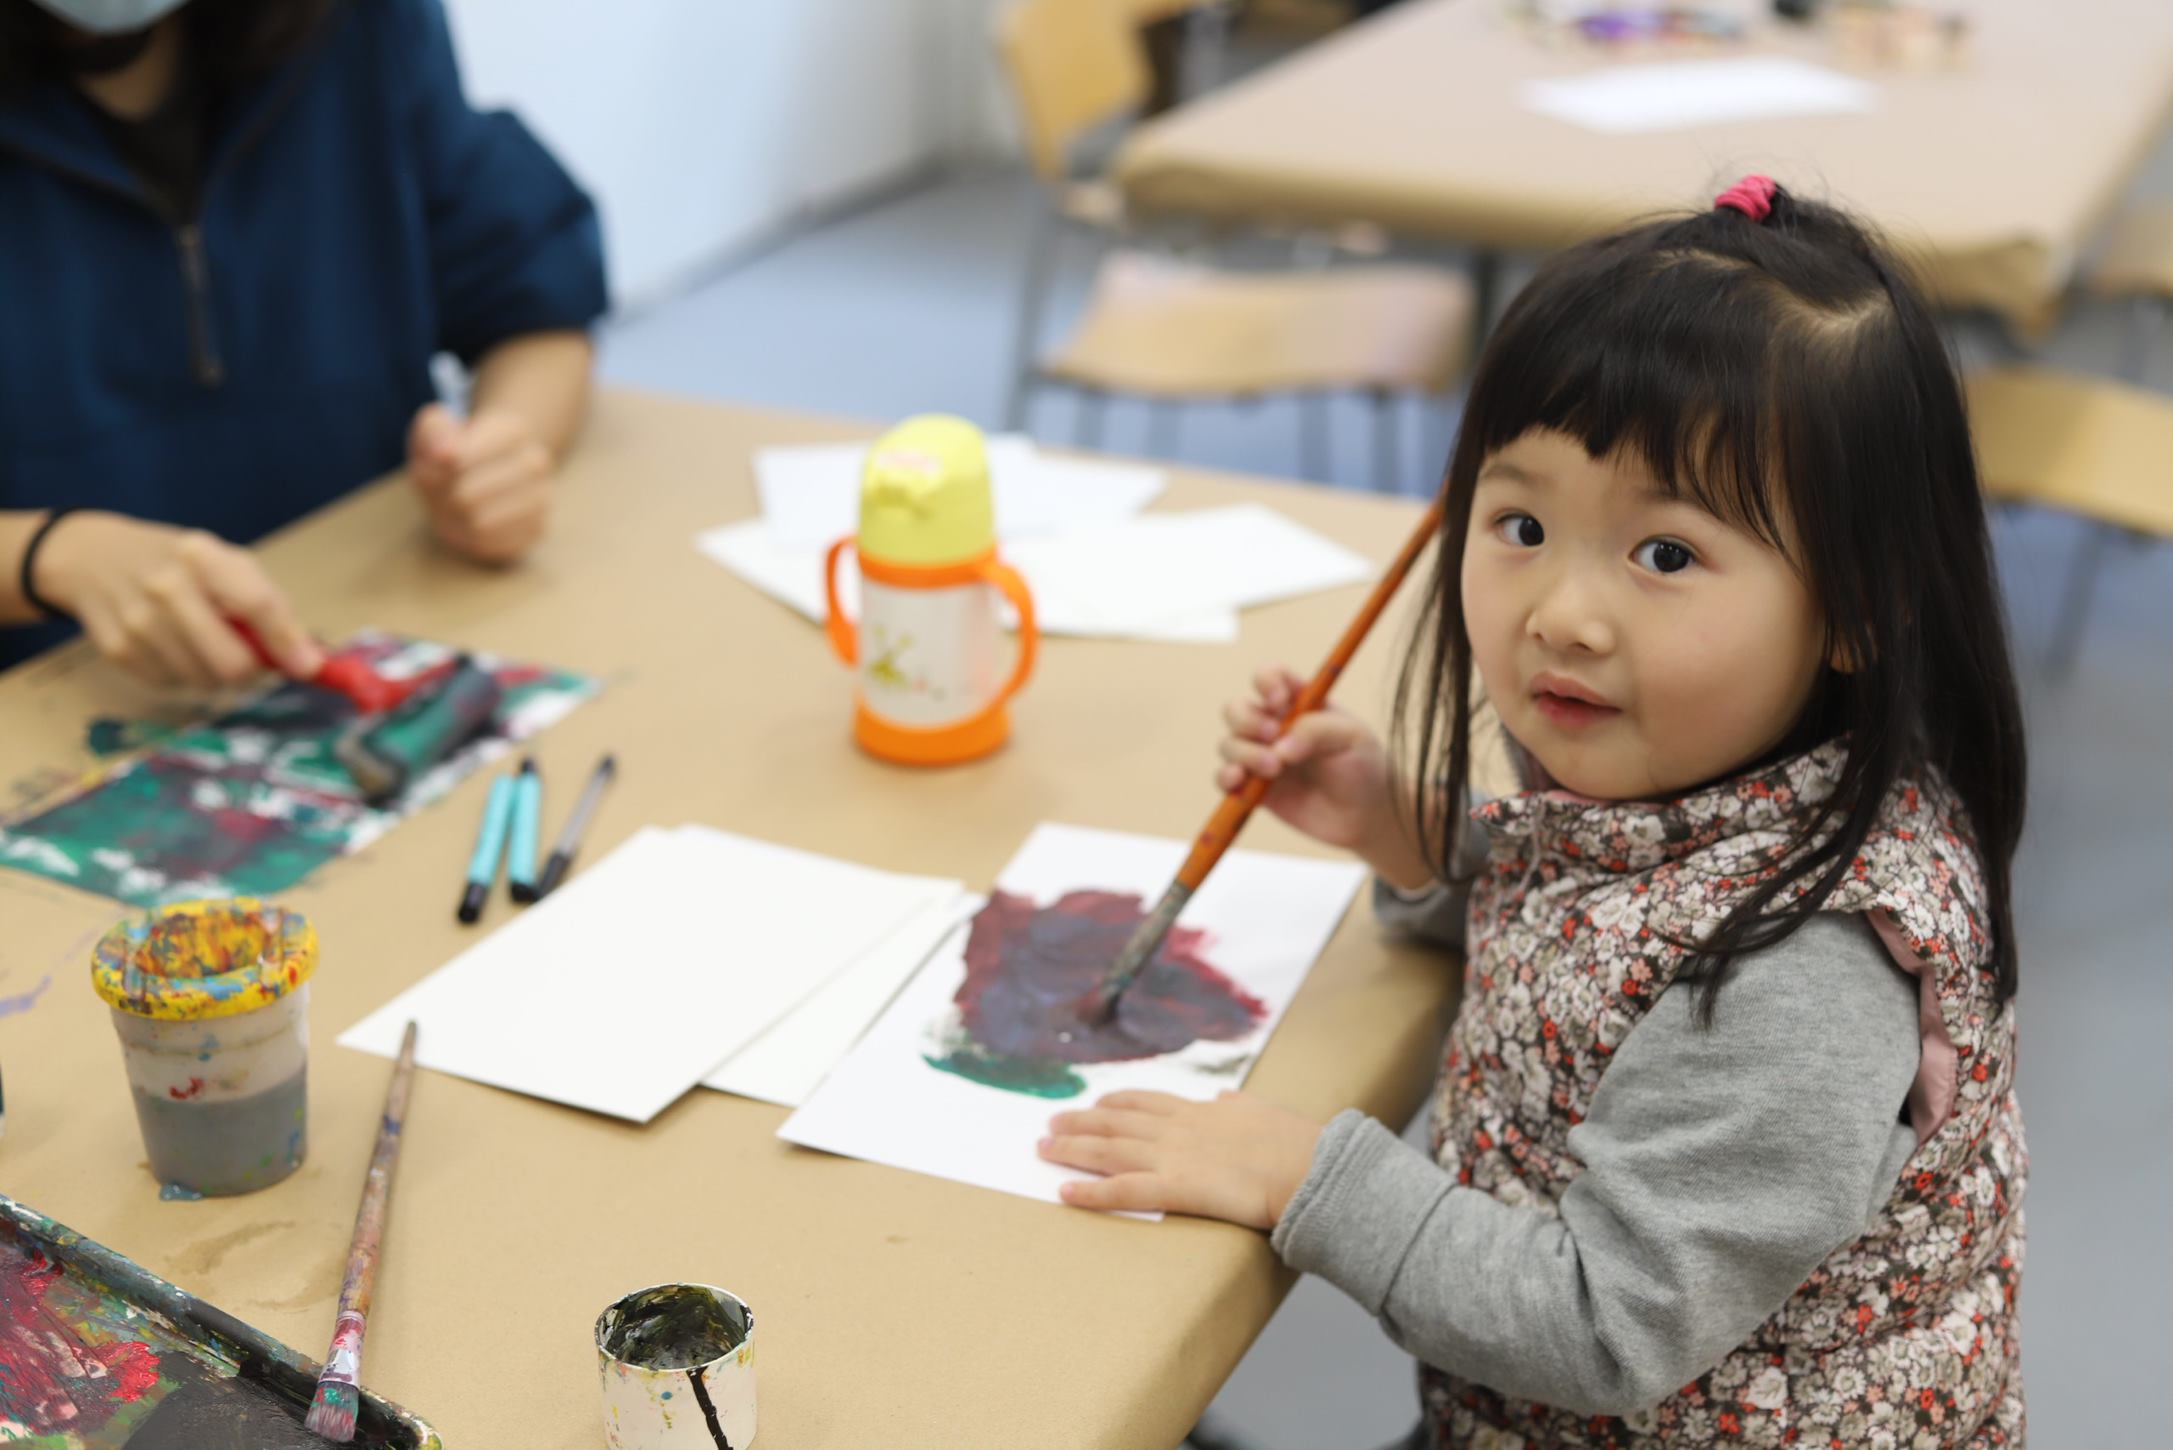 Photo of a young child painting while looking at the camera.